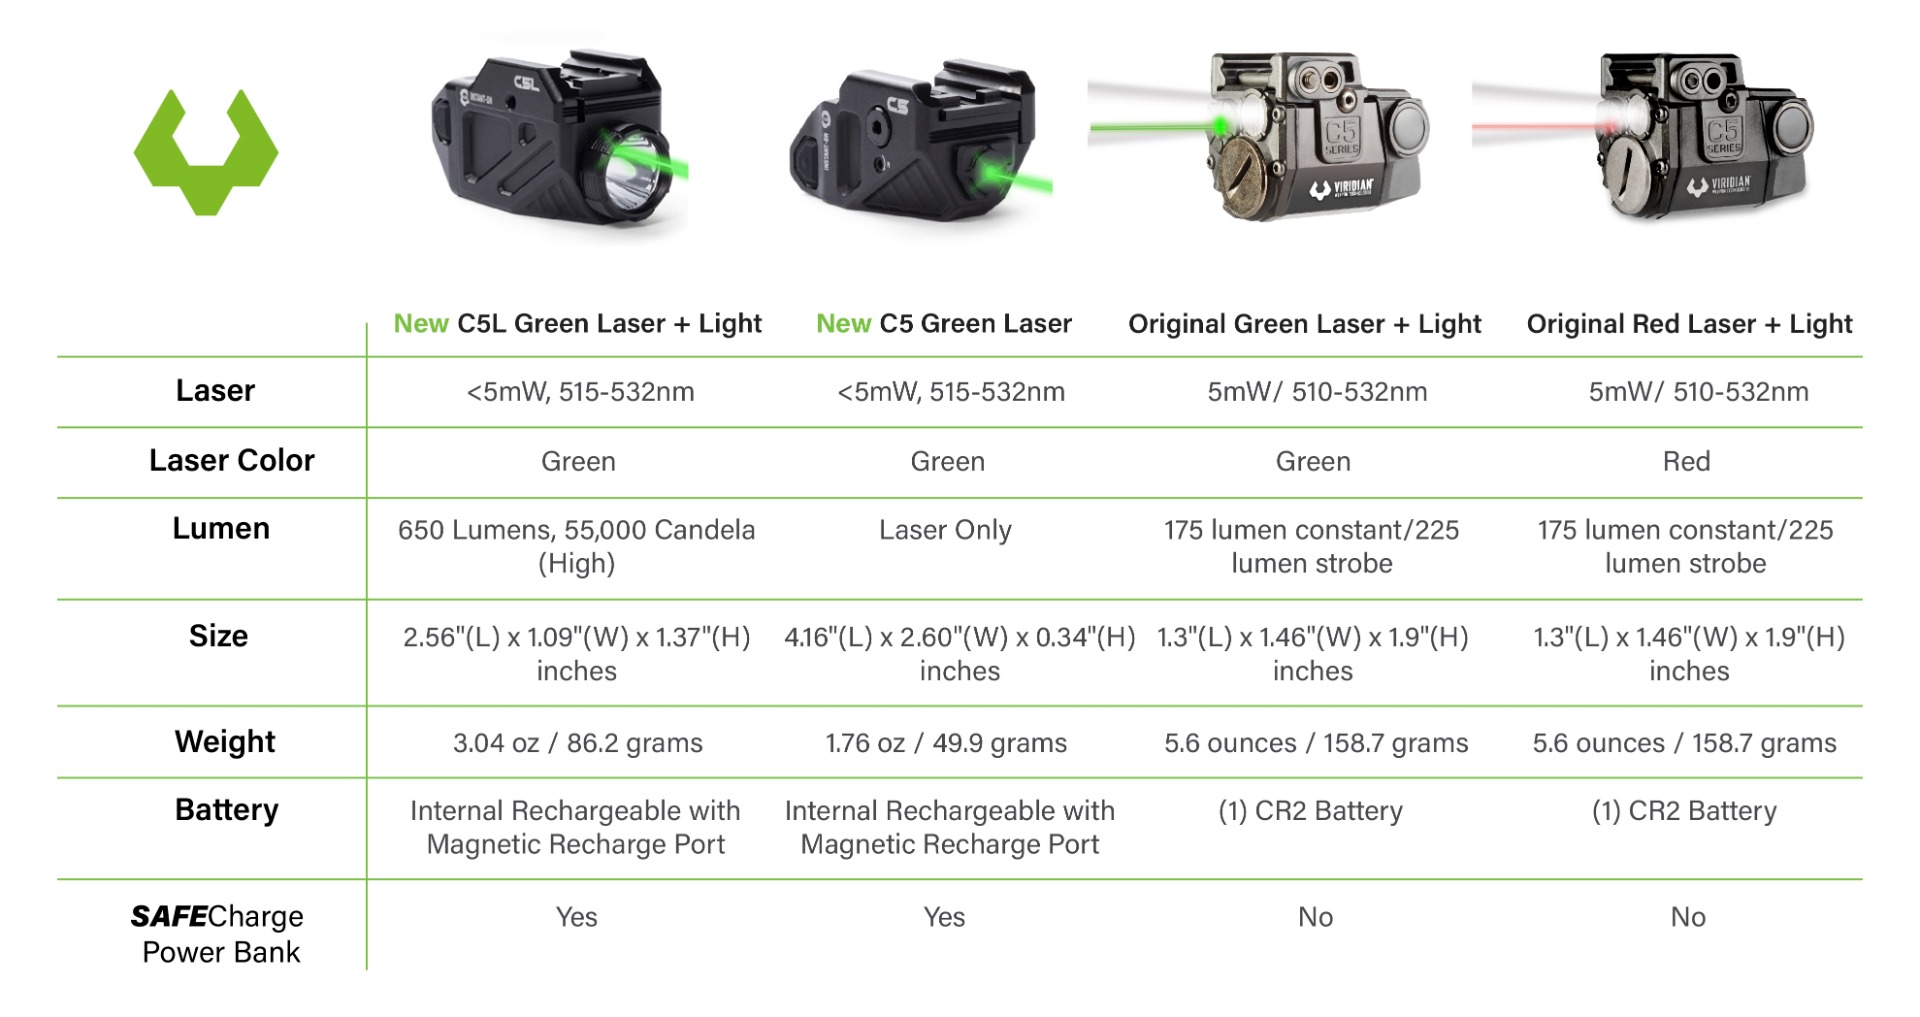 chart comparison of Laser, lumen, Size, Weight, Battery, SAFECharge Power
  Bank